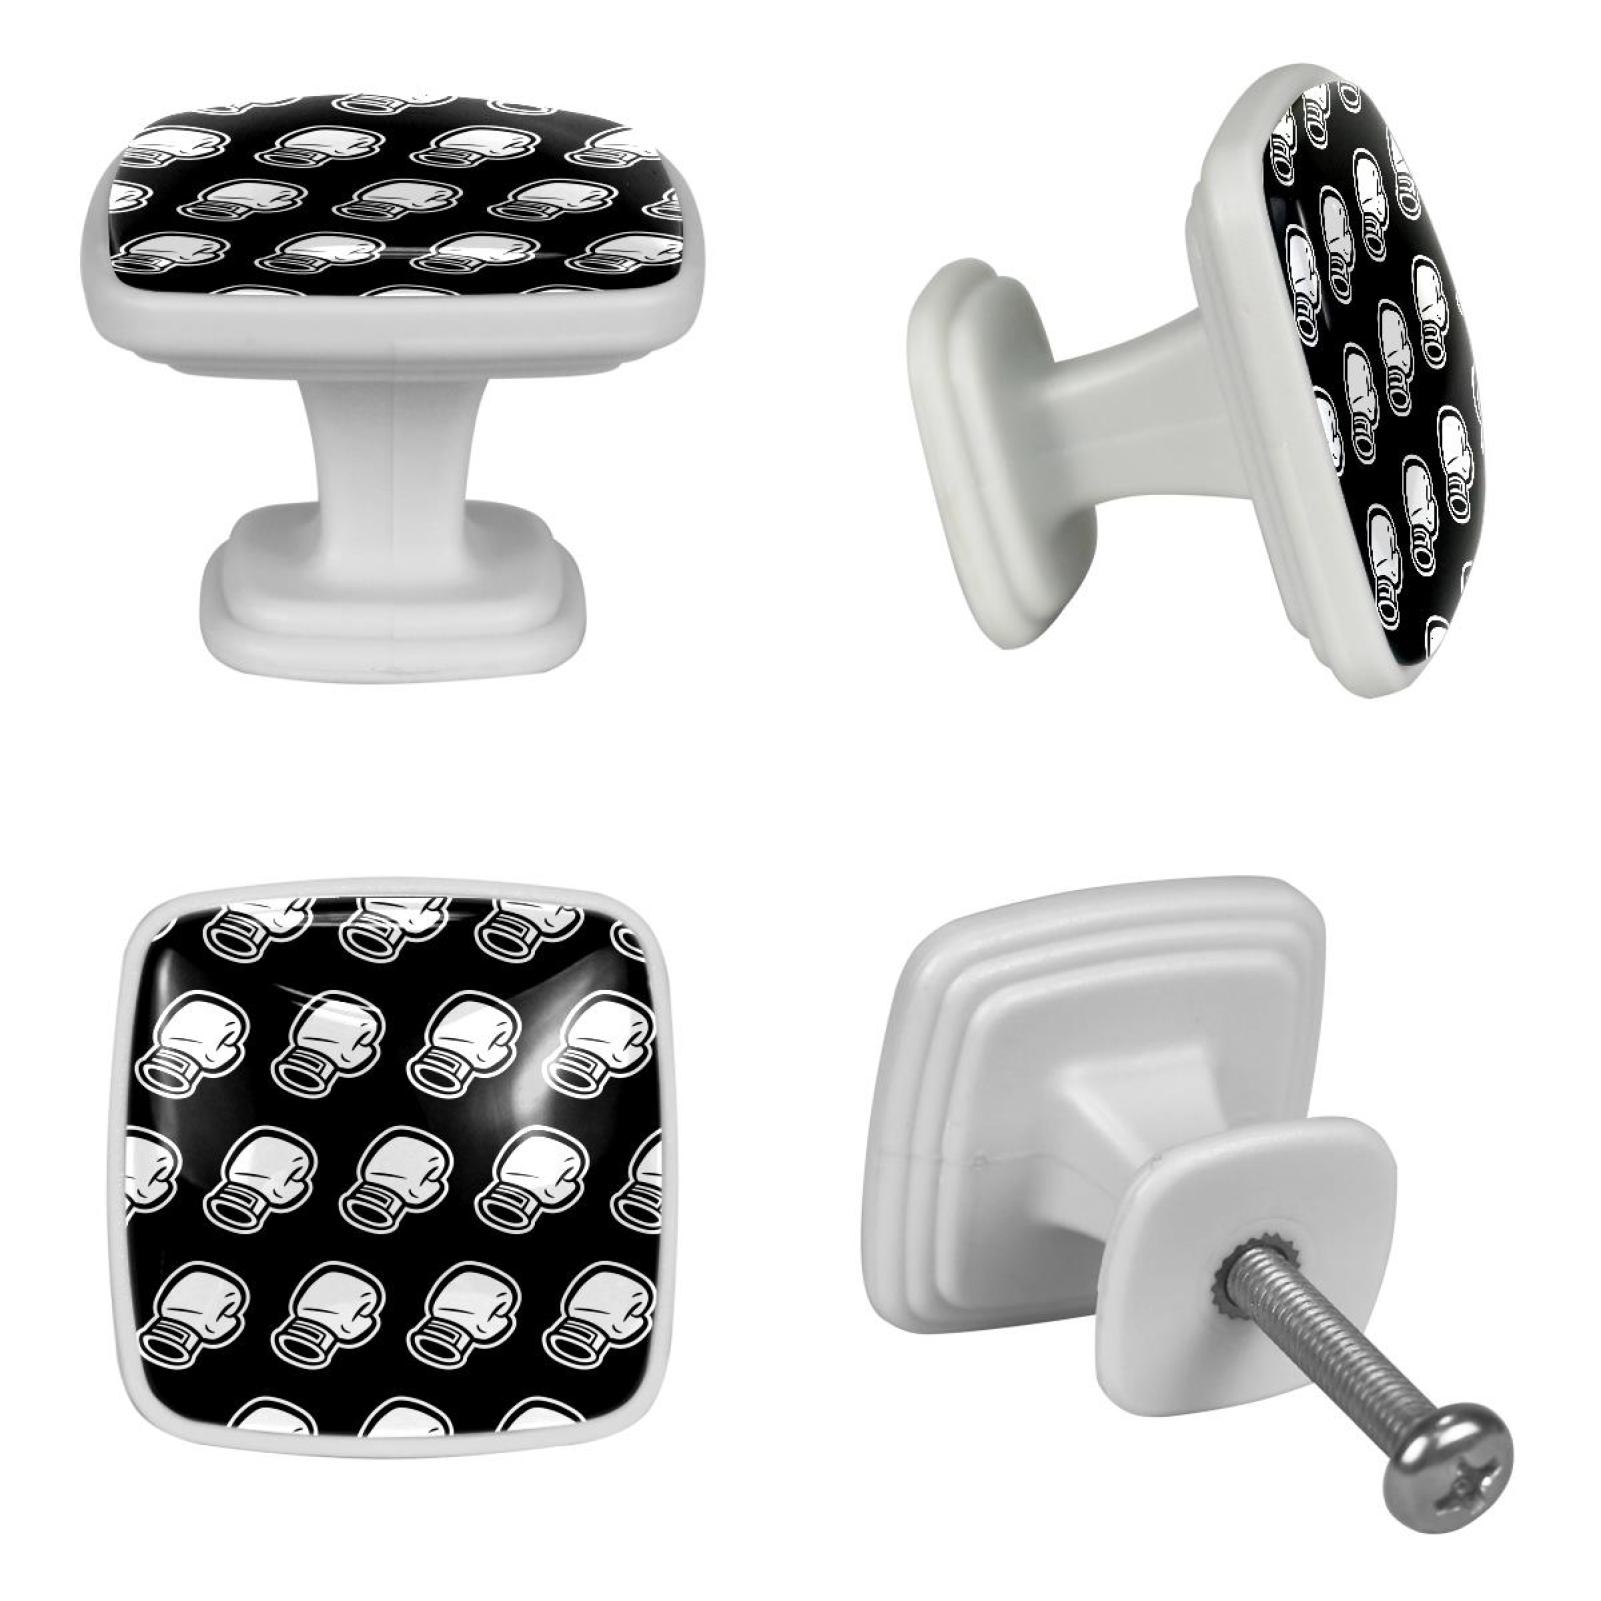 Ownta 4 Pcs Square Cabinet Handle Cupboard Fluorescence Knob Glowing in the Dark Drawer Pulls Handle Drawer Knobs with Screws Furniture Decor Black White Boxing Gloves Punching - image 4 of 5